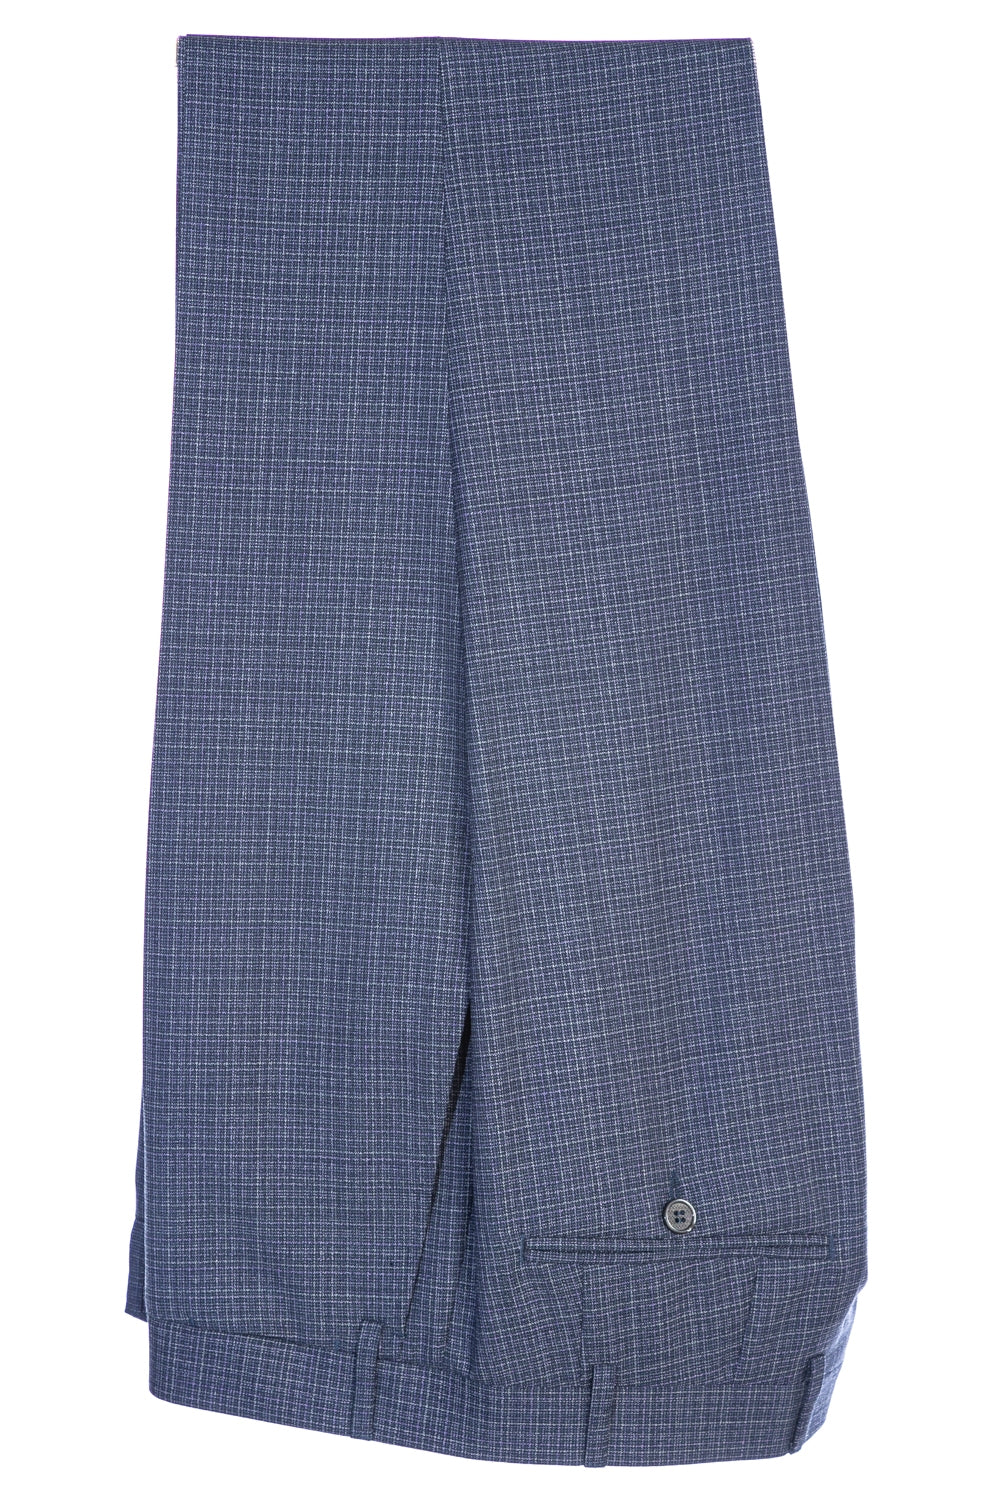 Canali Weave With Notch Lapel Suit in Blue Trouser